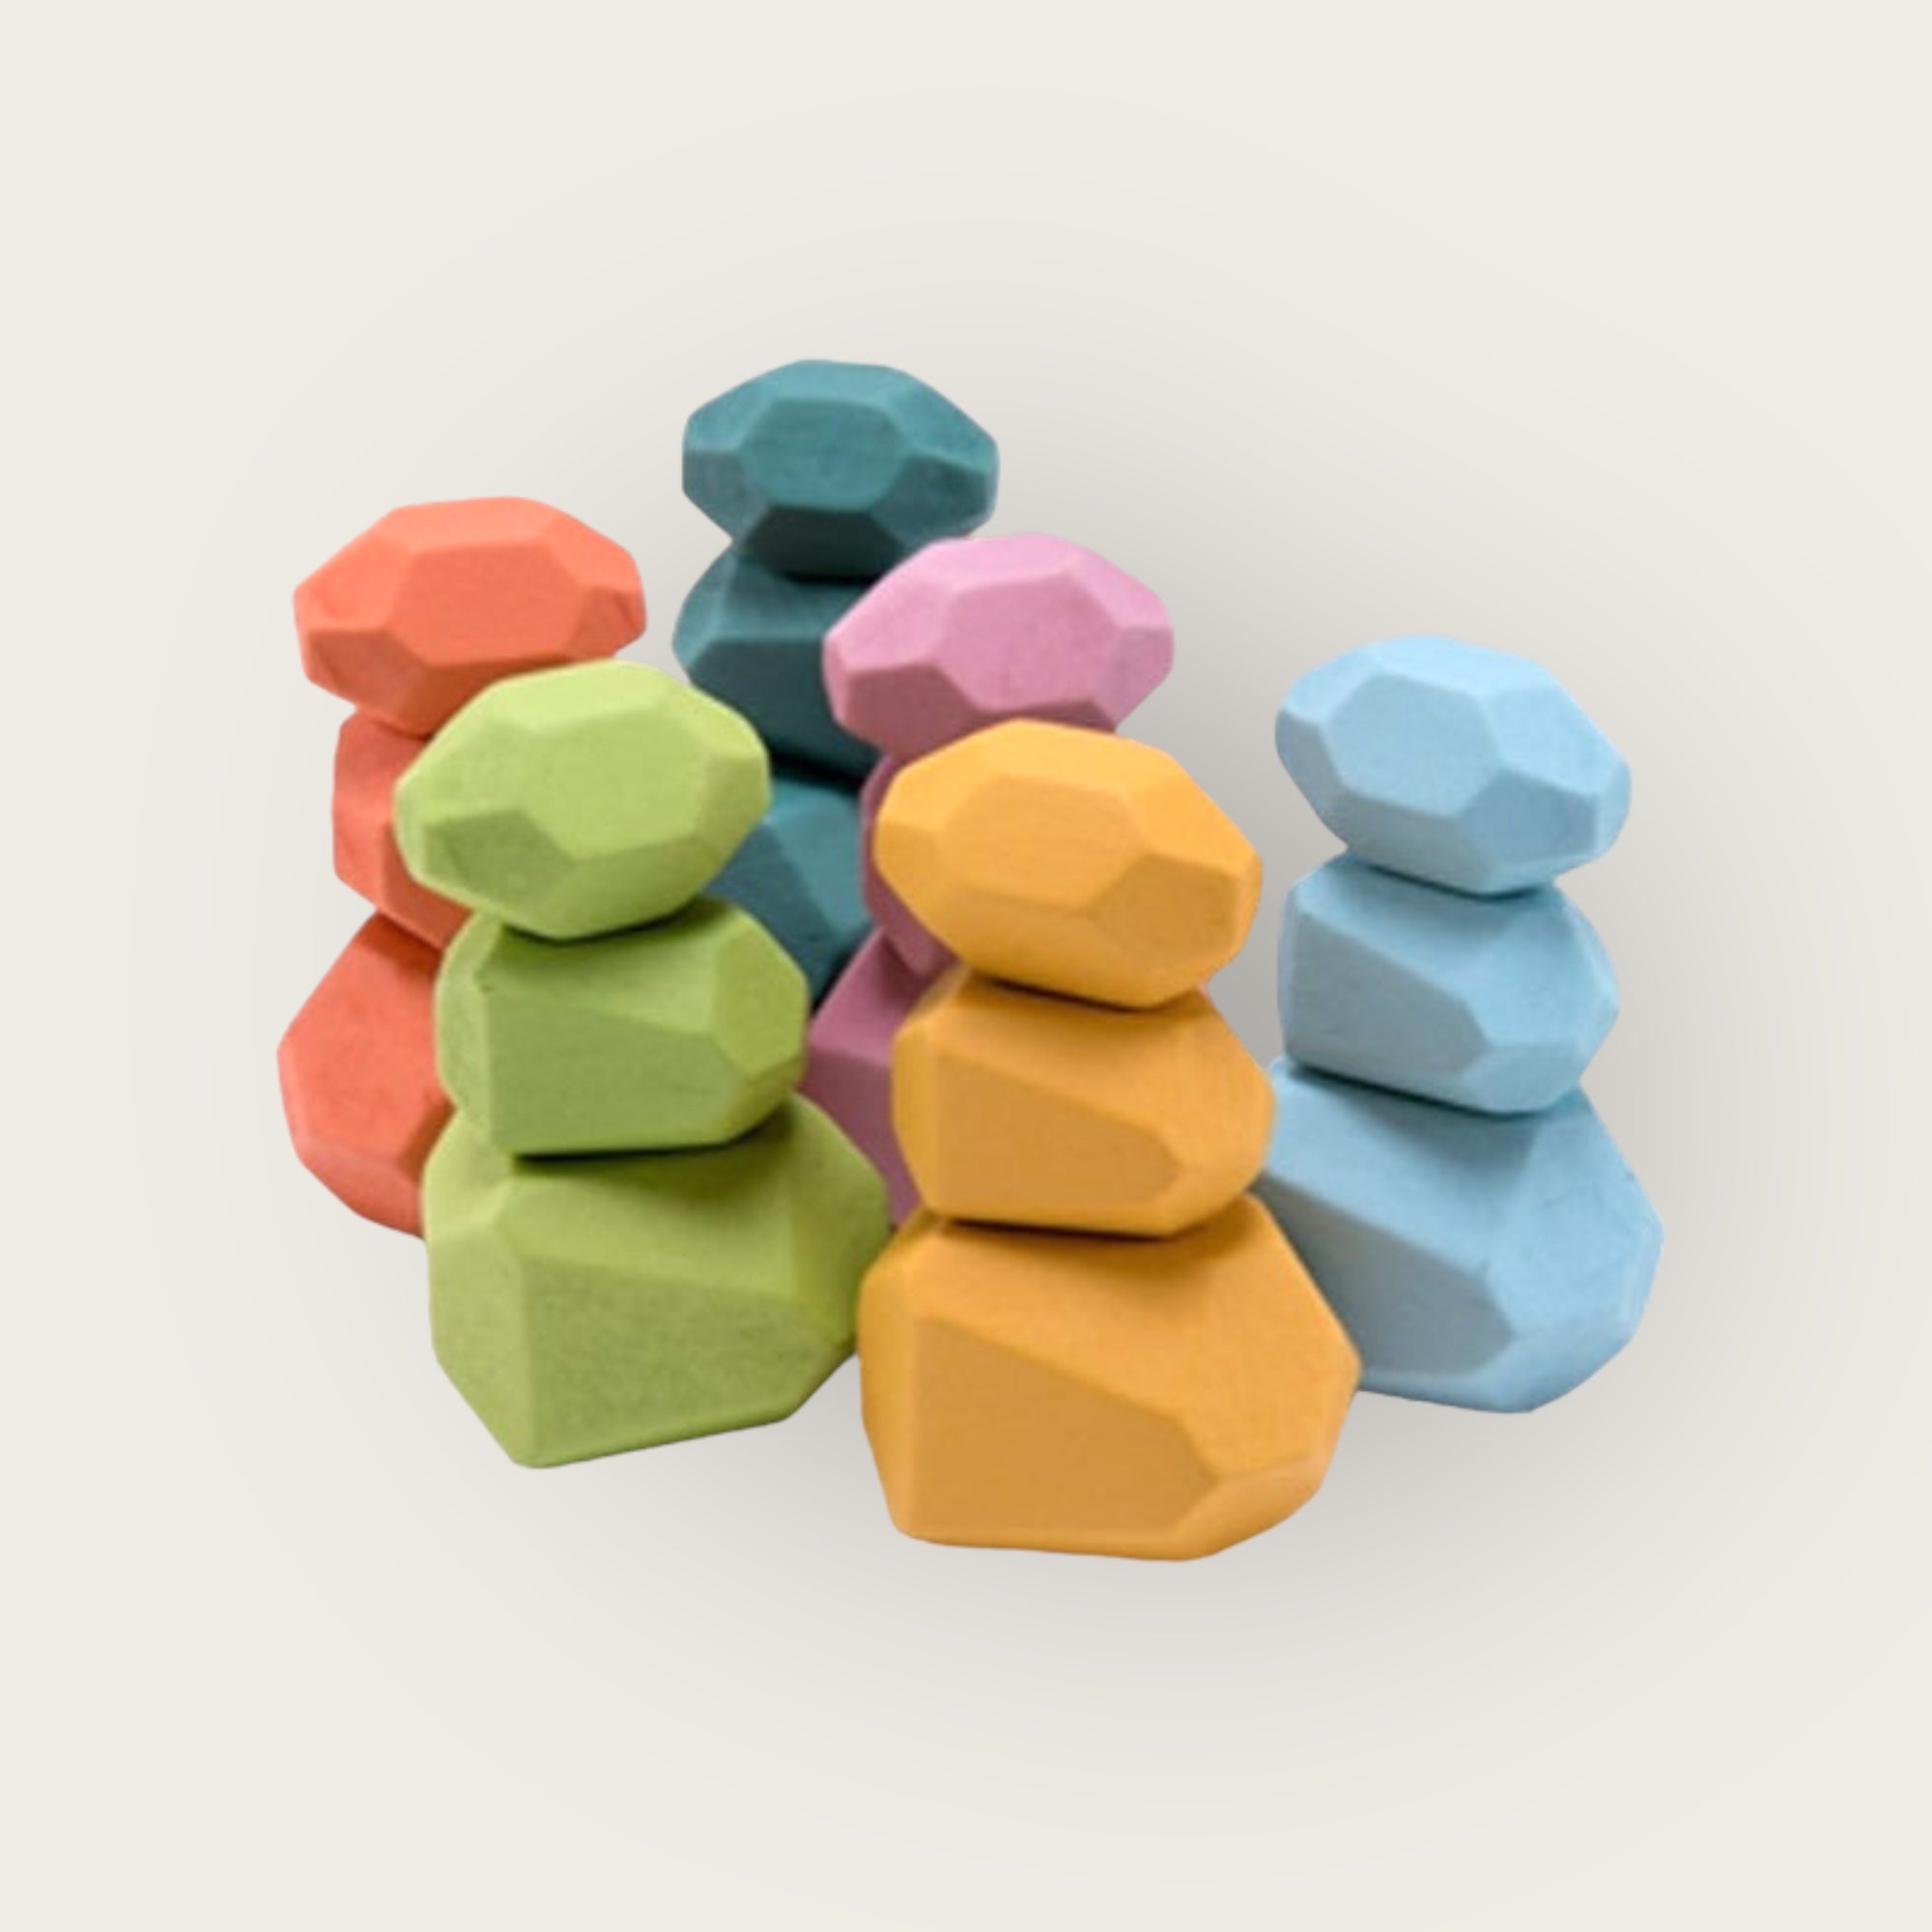 Wooden Stacking Stones - 18 piece